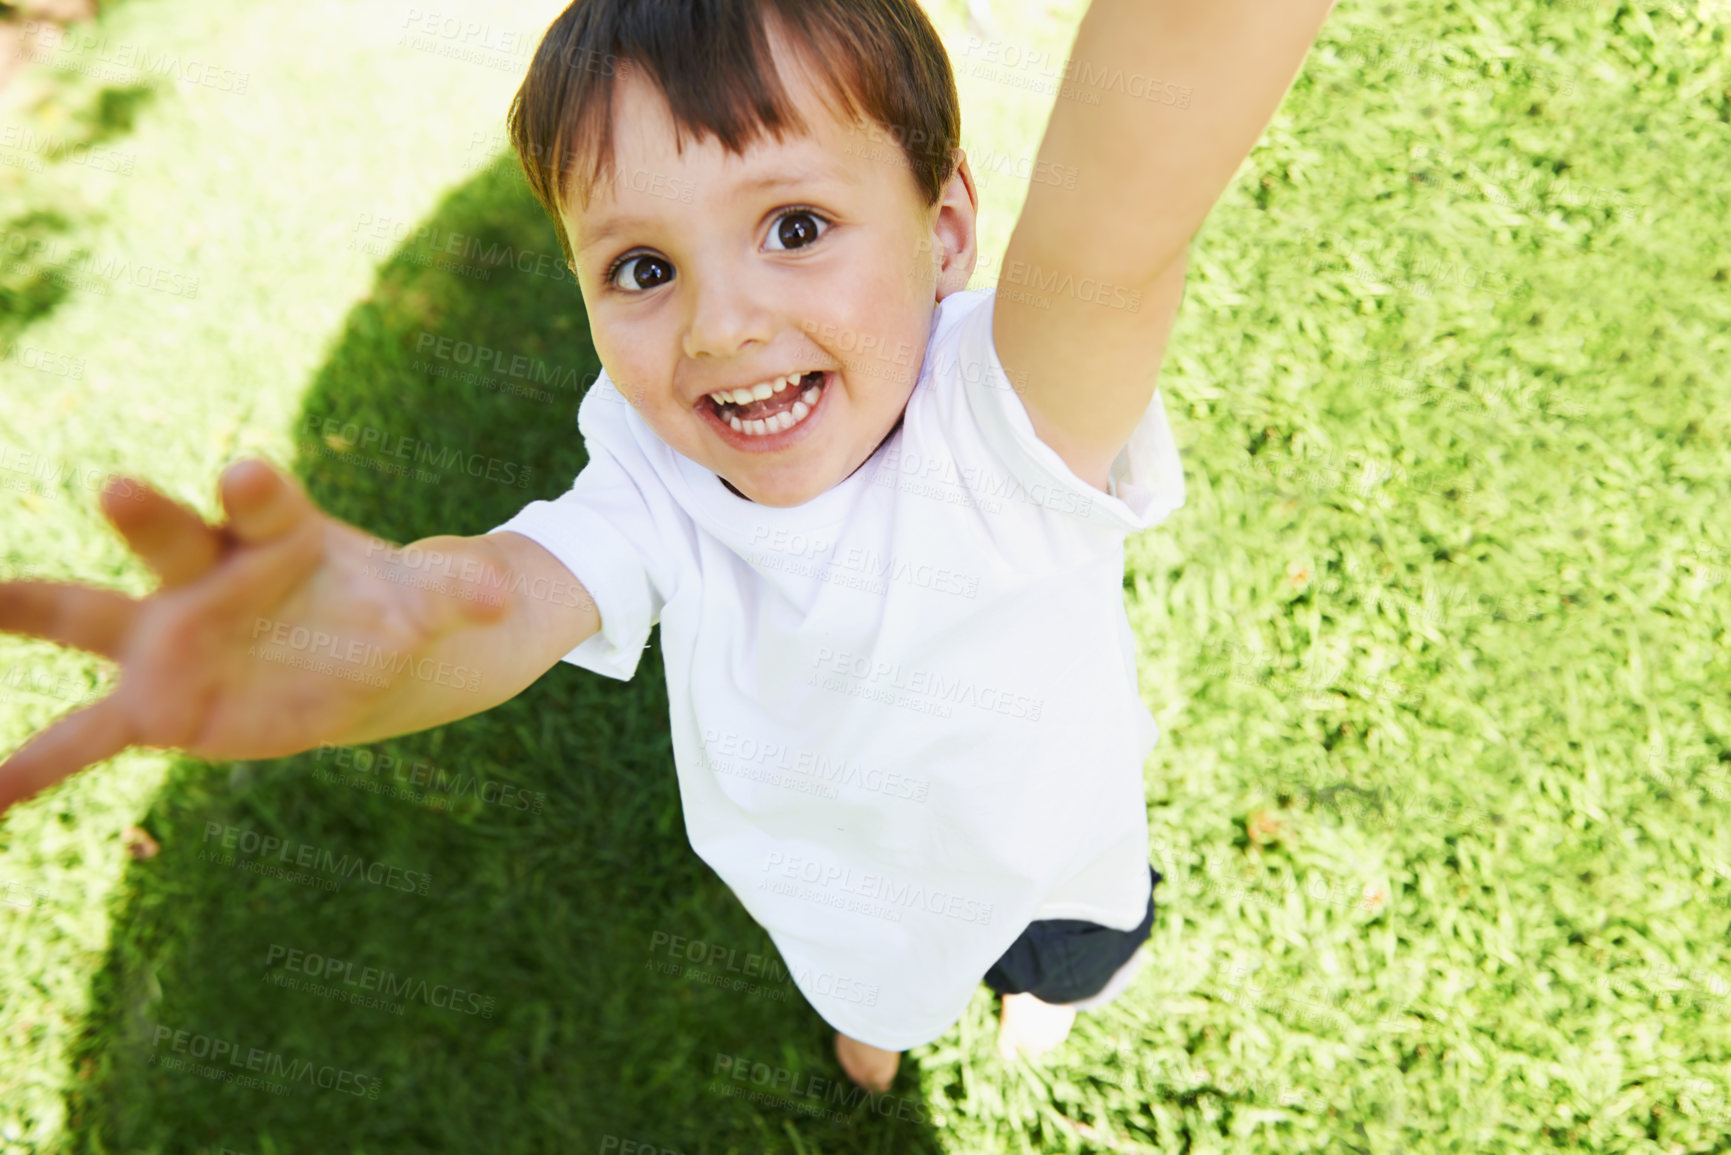 Buy stock photo High angle view of a little boy reaching up into the air